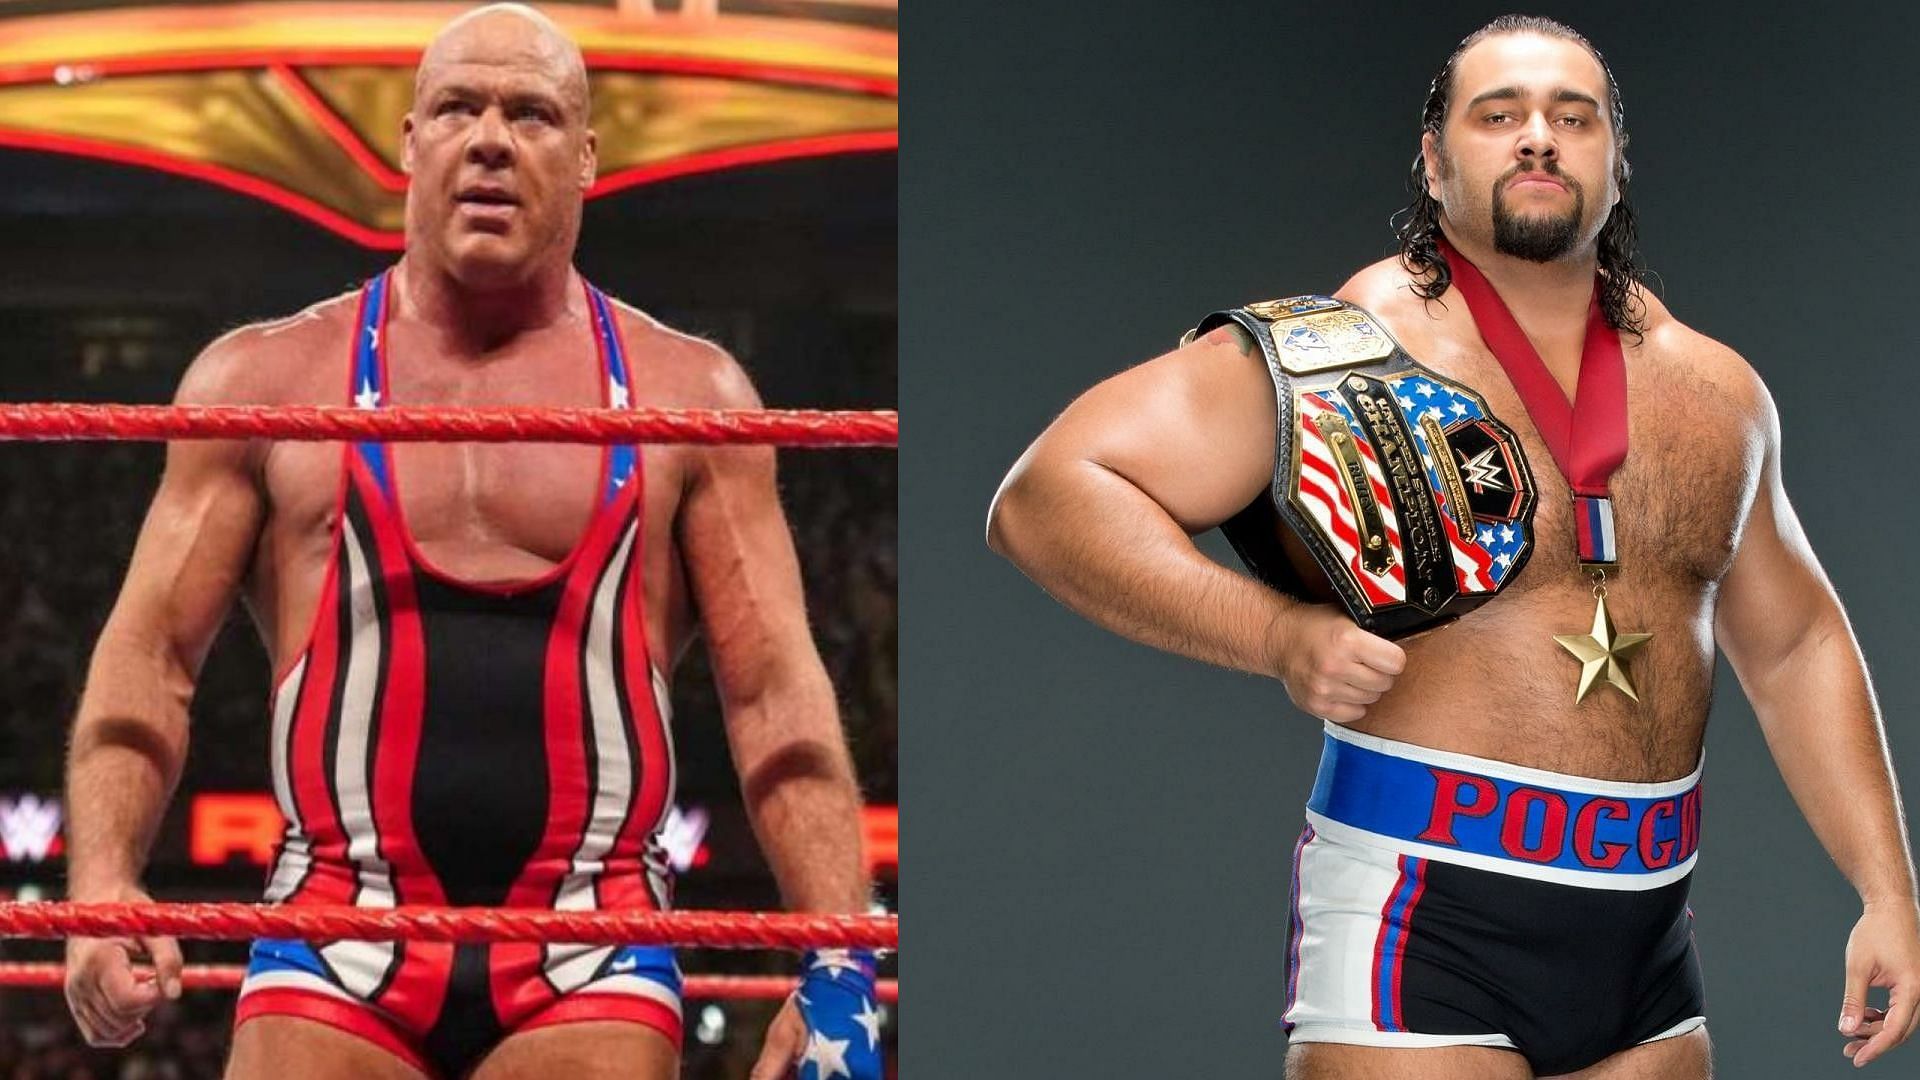 Kurt Angle &amp; Rusev were two Superstars who were released by WWE in 2020.